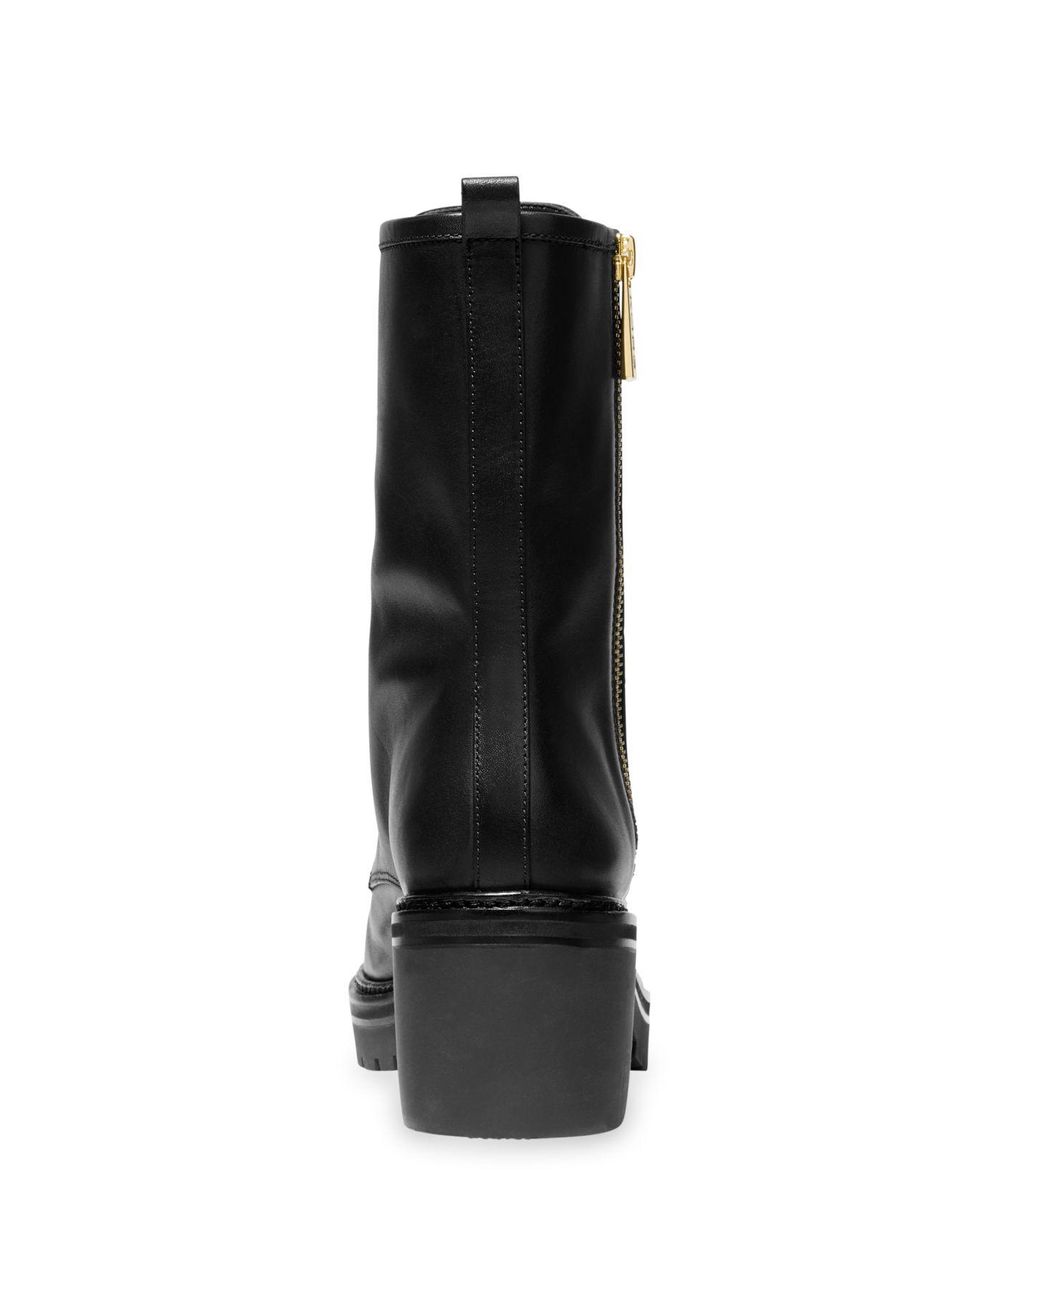 Michael Kors Anaka Leather Combat Boot in Black | Lyst